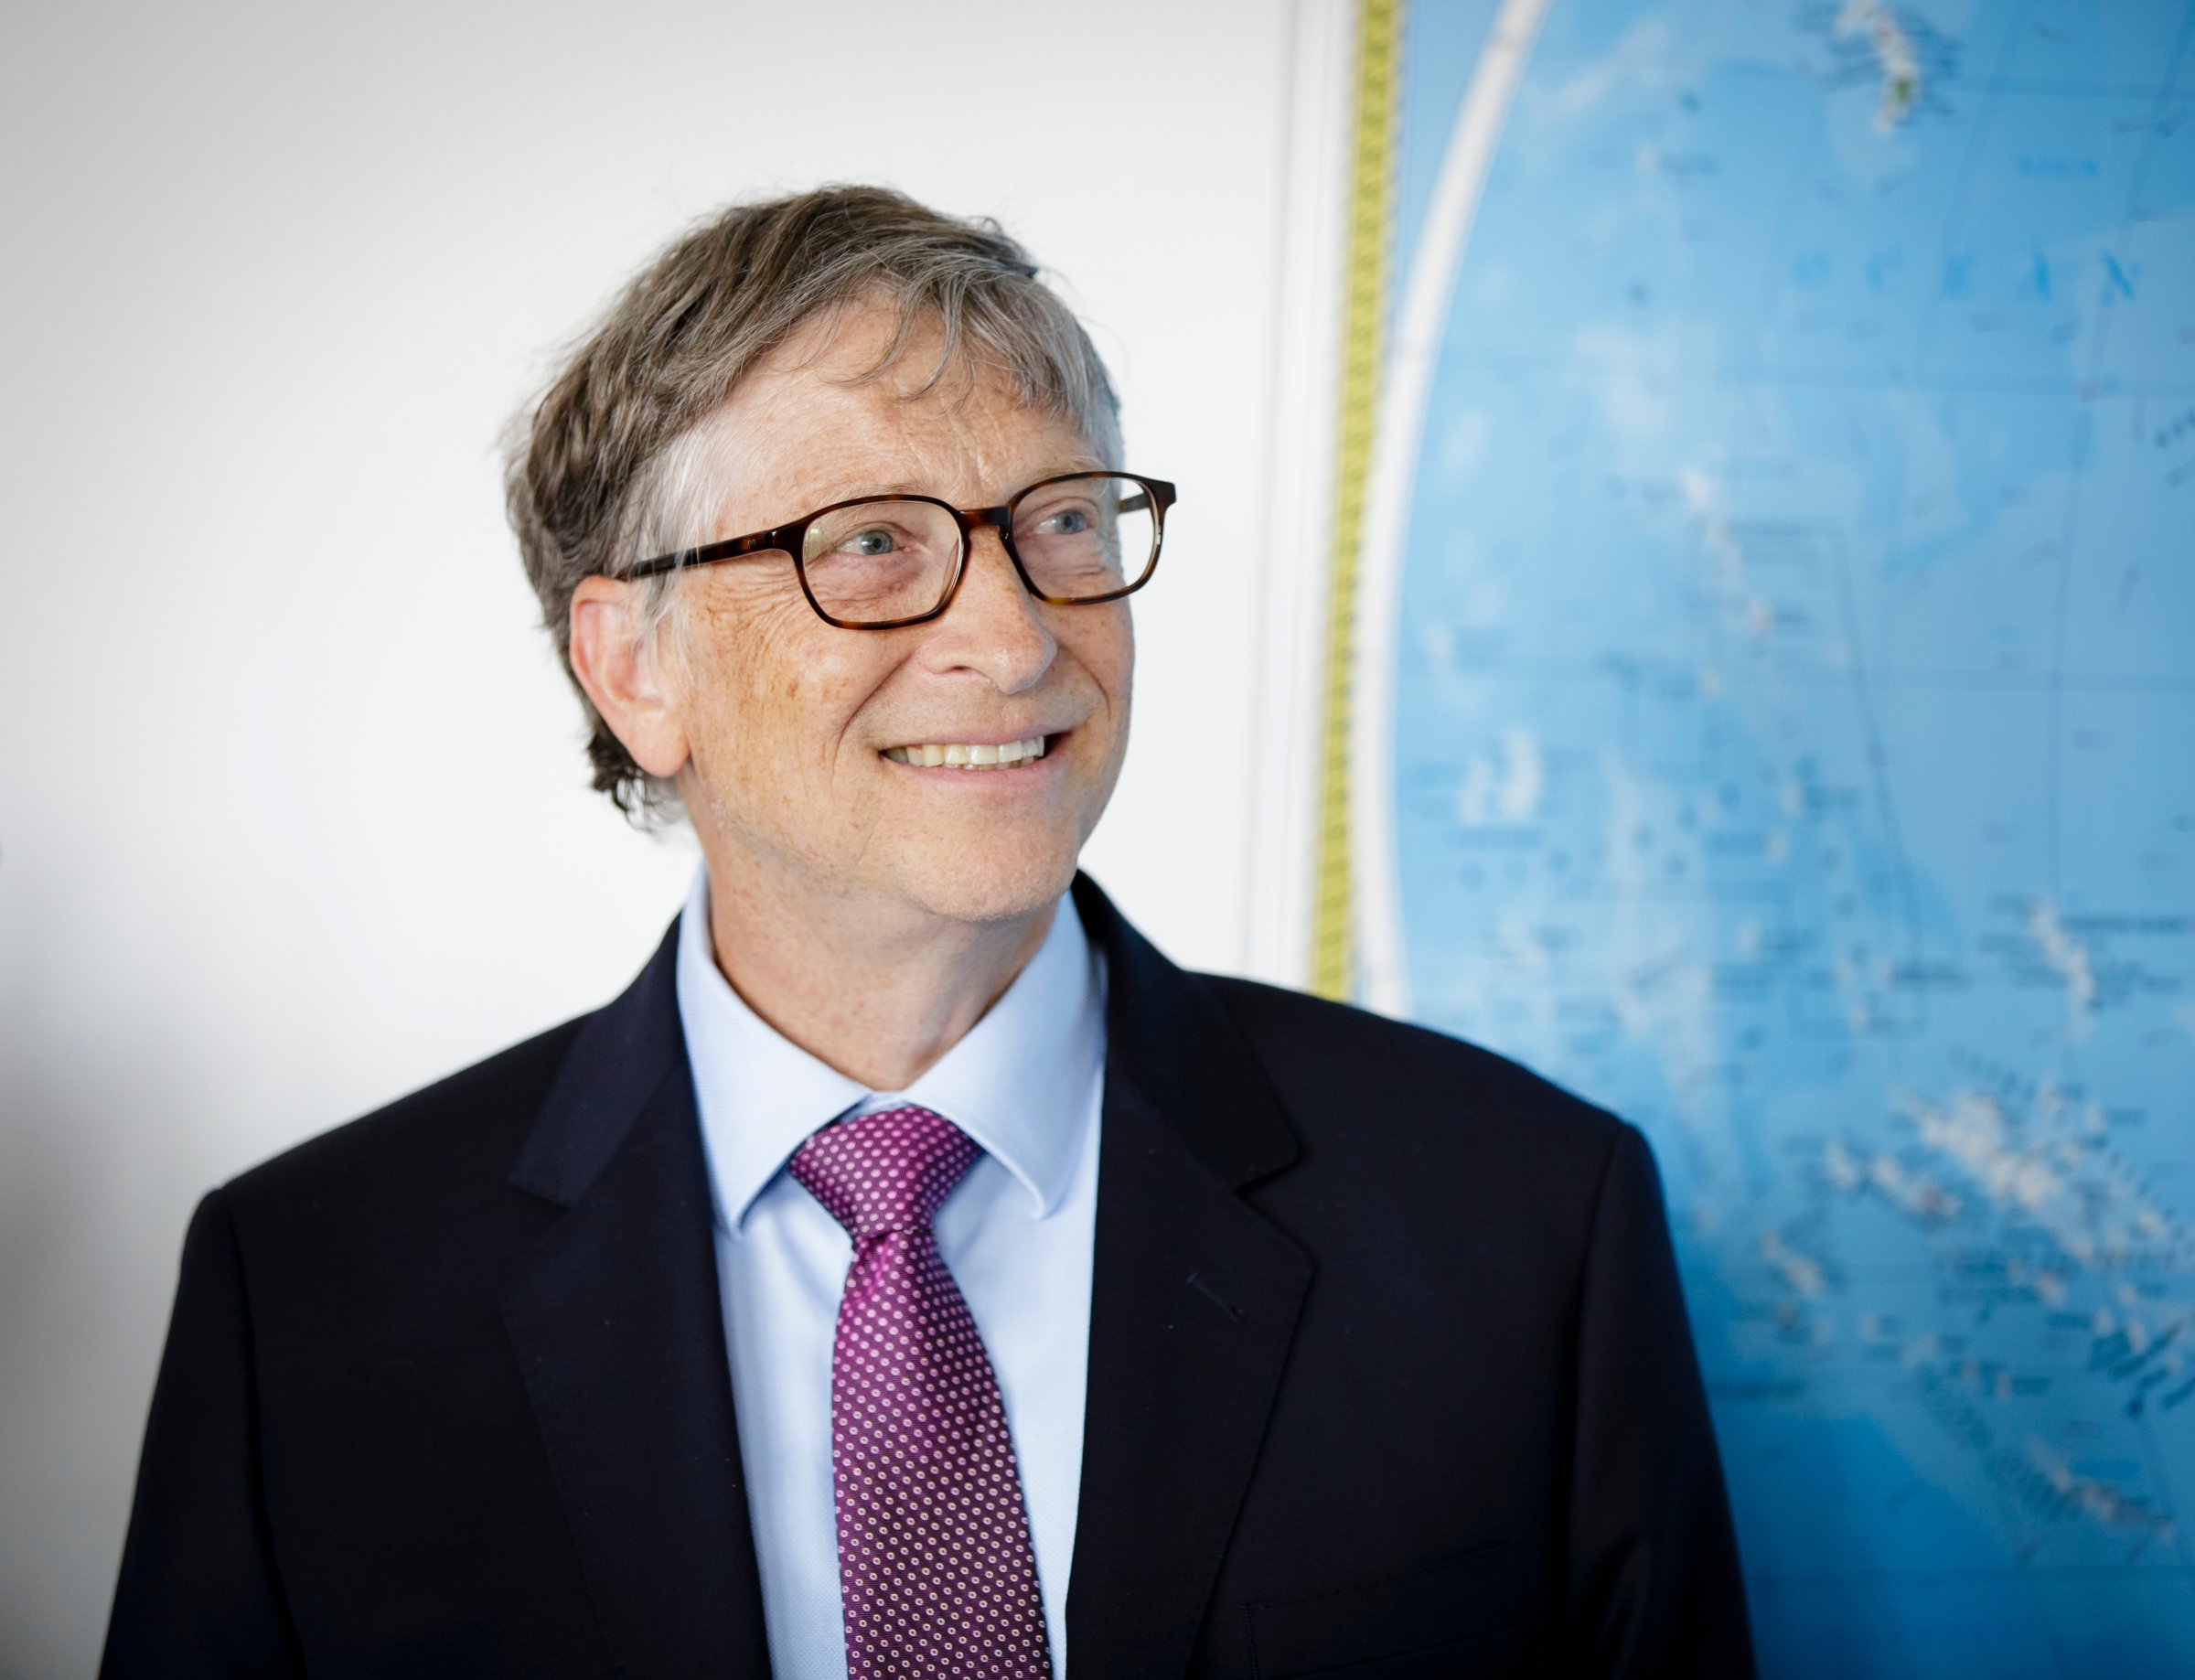 Bill Gates smiling next to map of the world